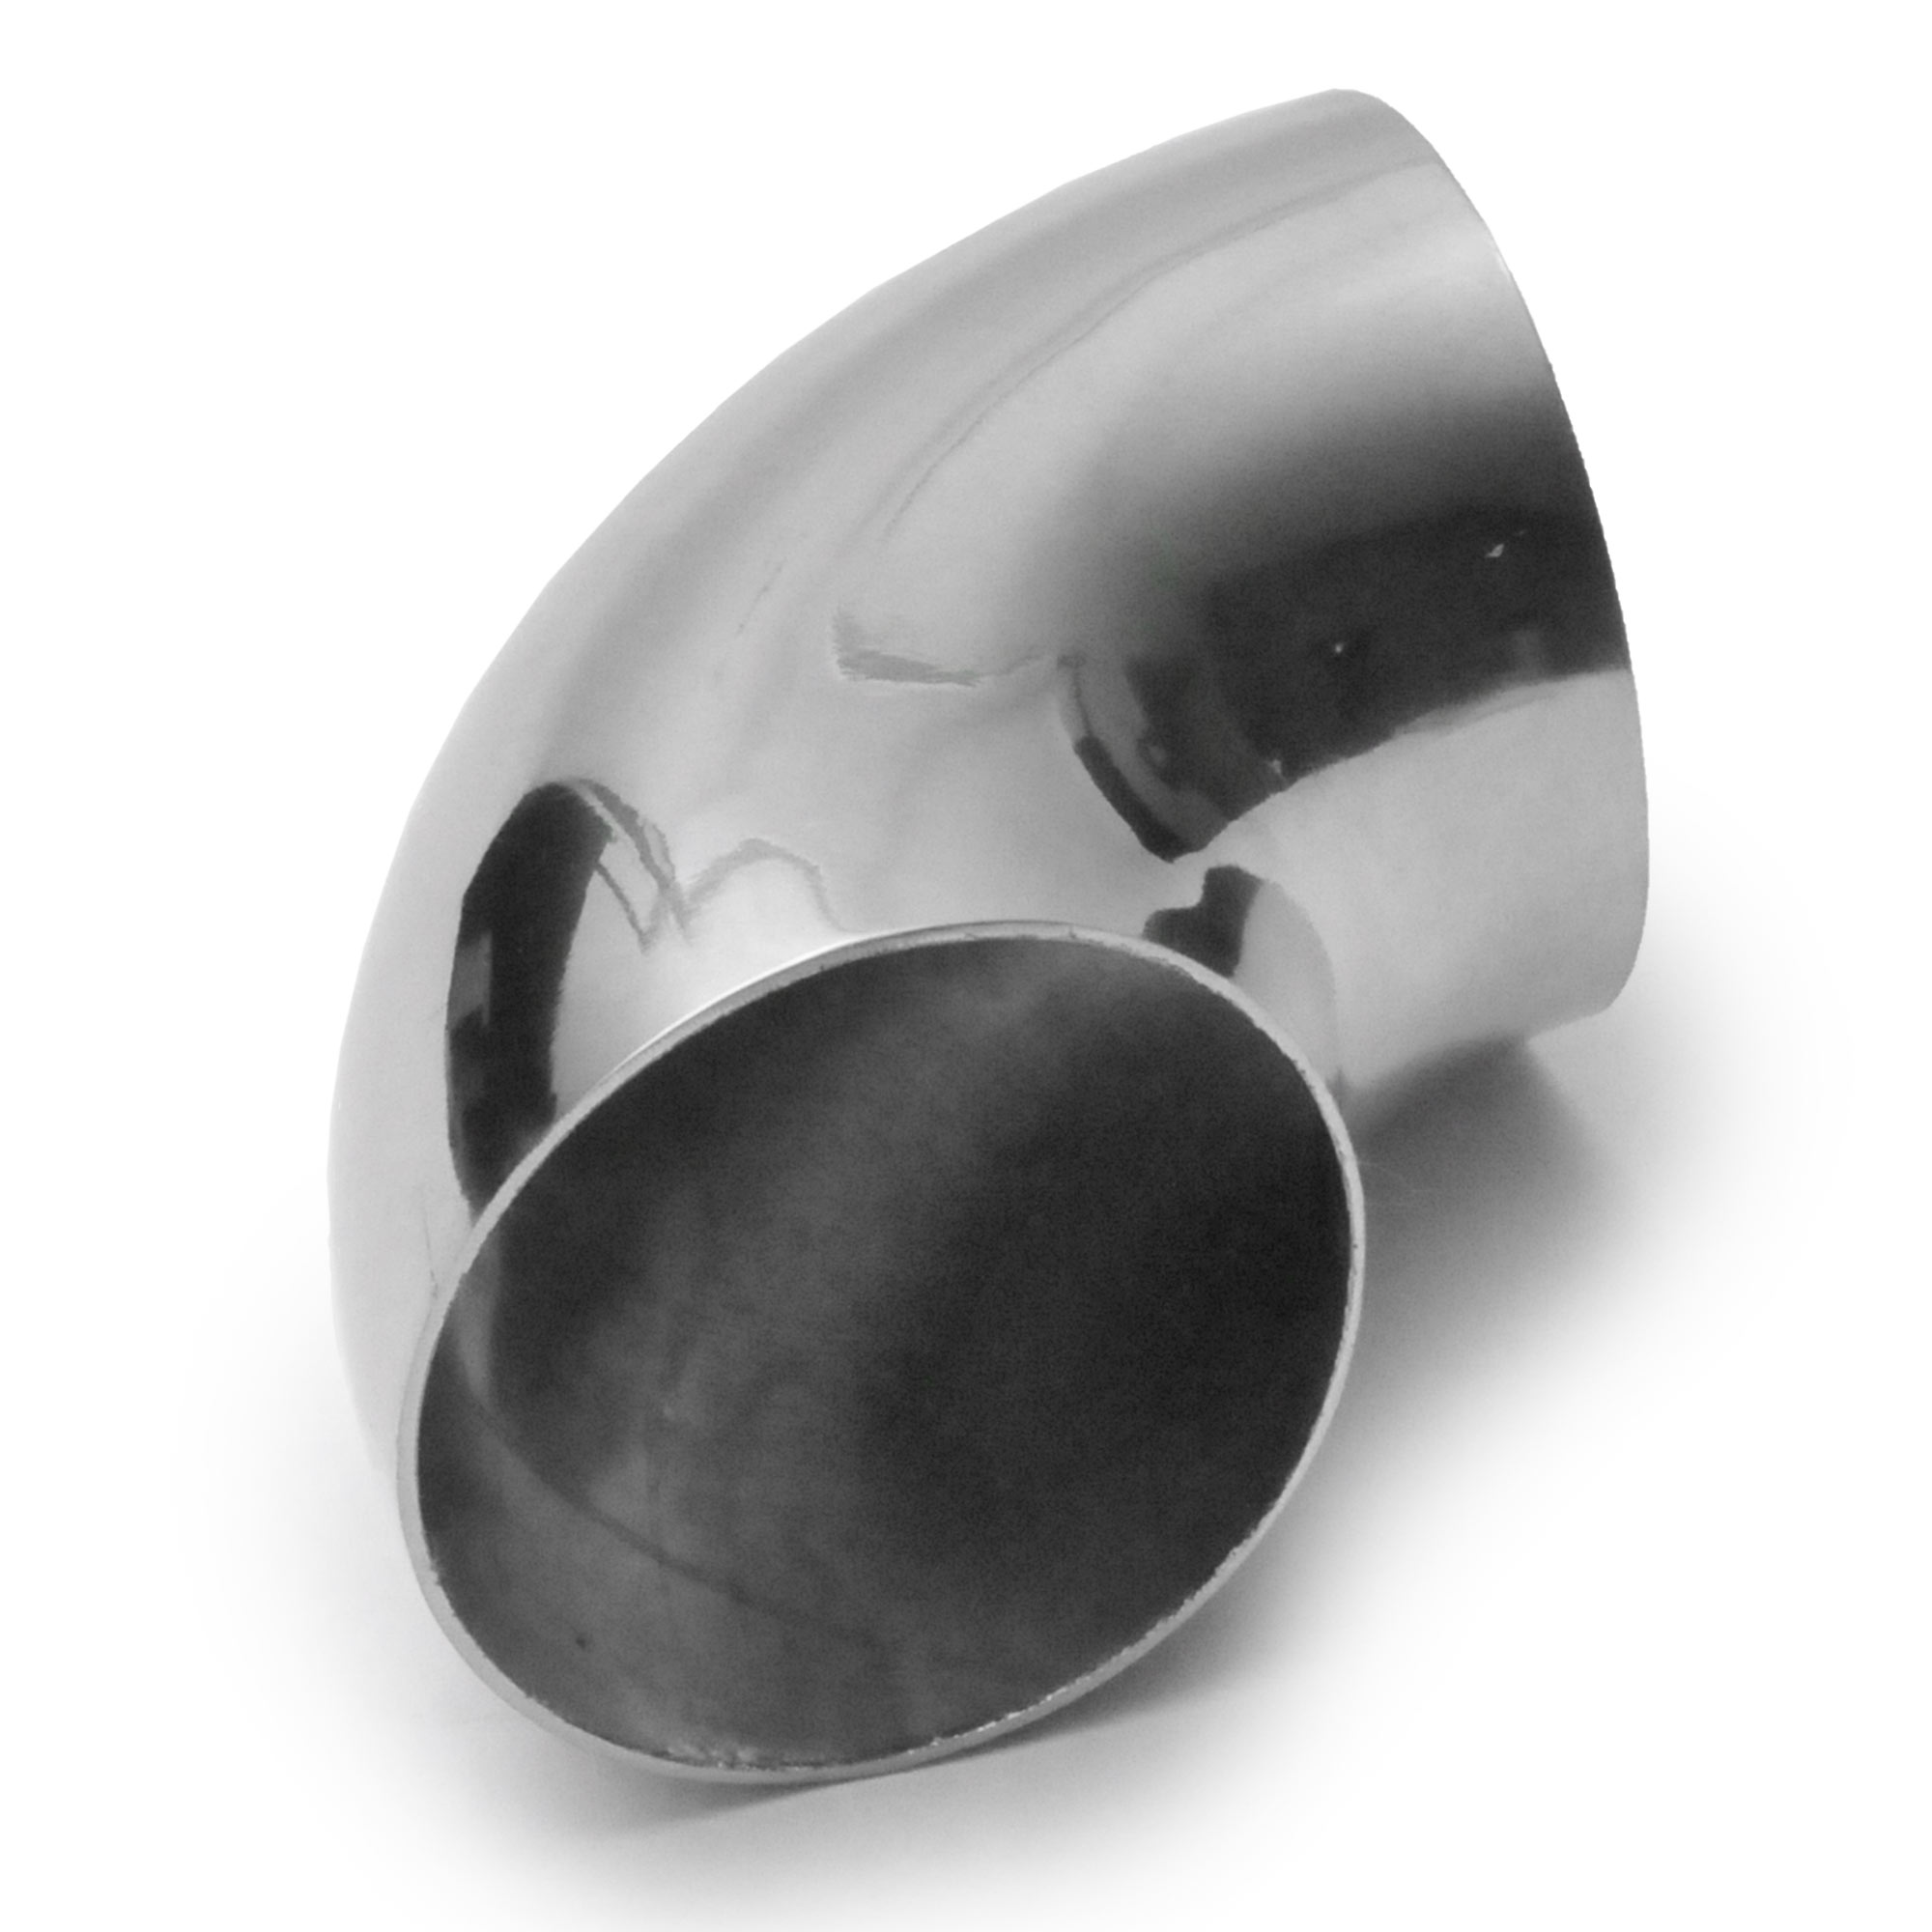 Krator 2.5" OD Stainless Steel 90° Mandrel Bend Elbow Exhaust Pipe- 2.5" Tight Bend Radius- 16GA/.065" Wall Thickness